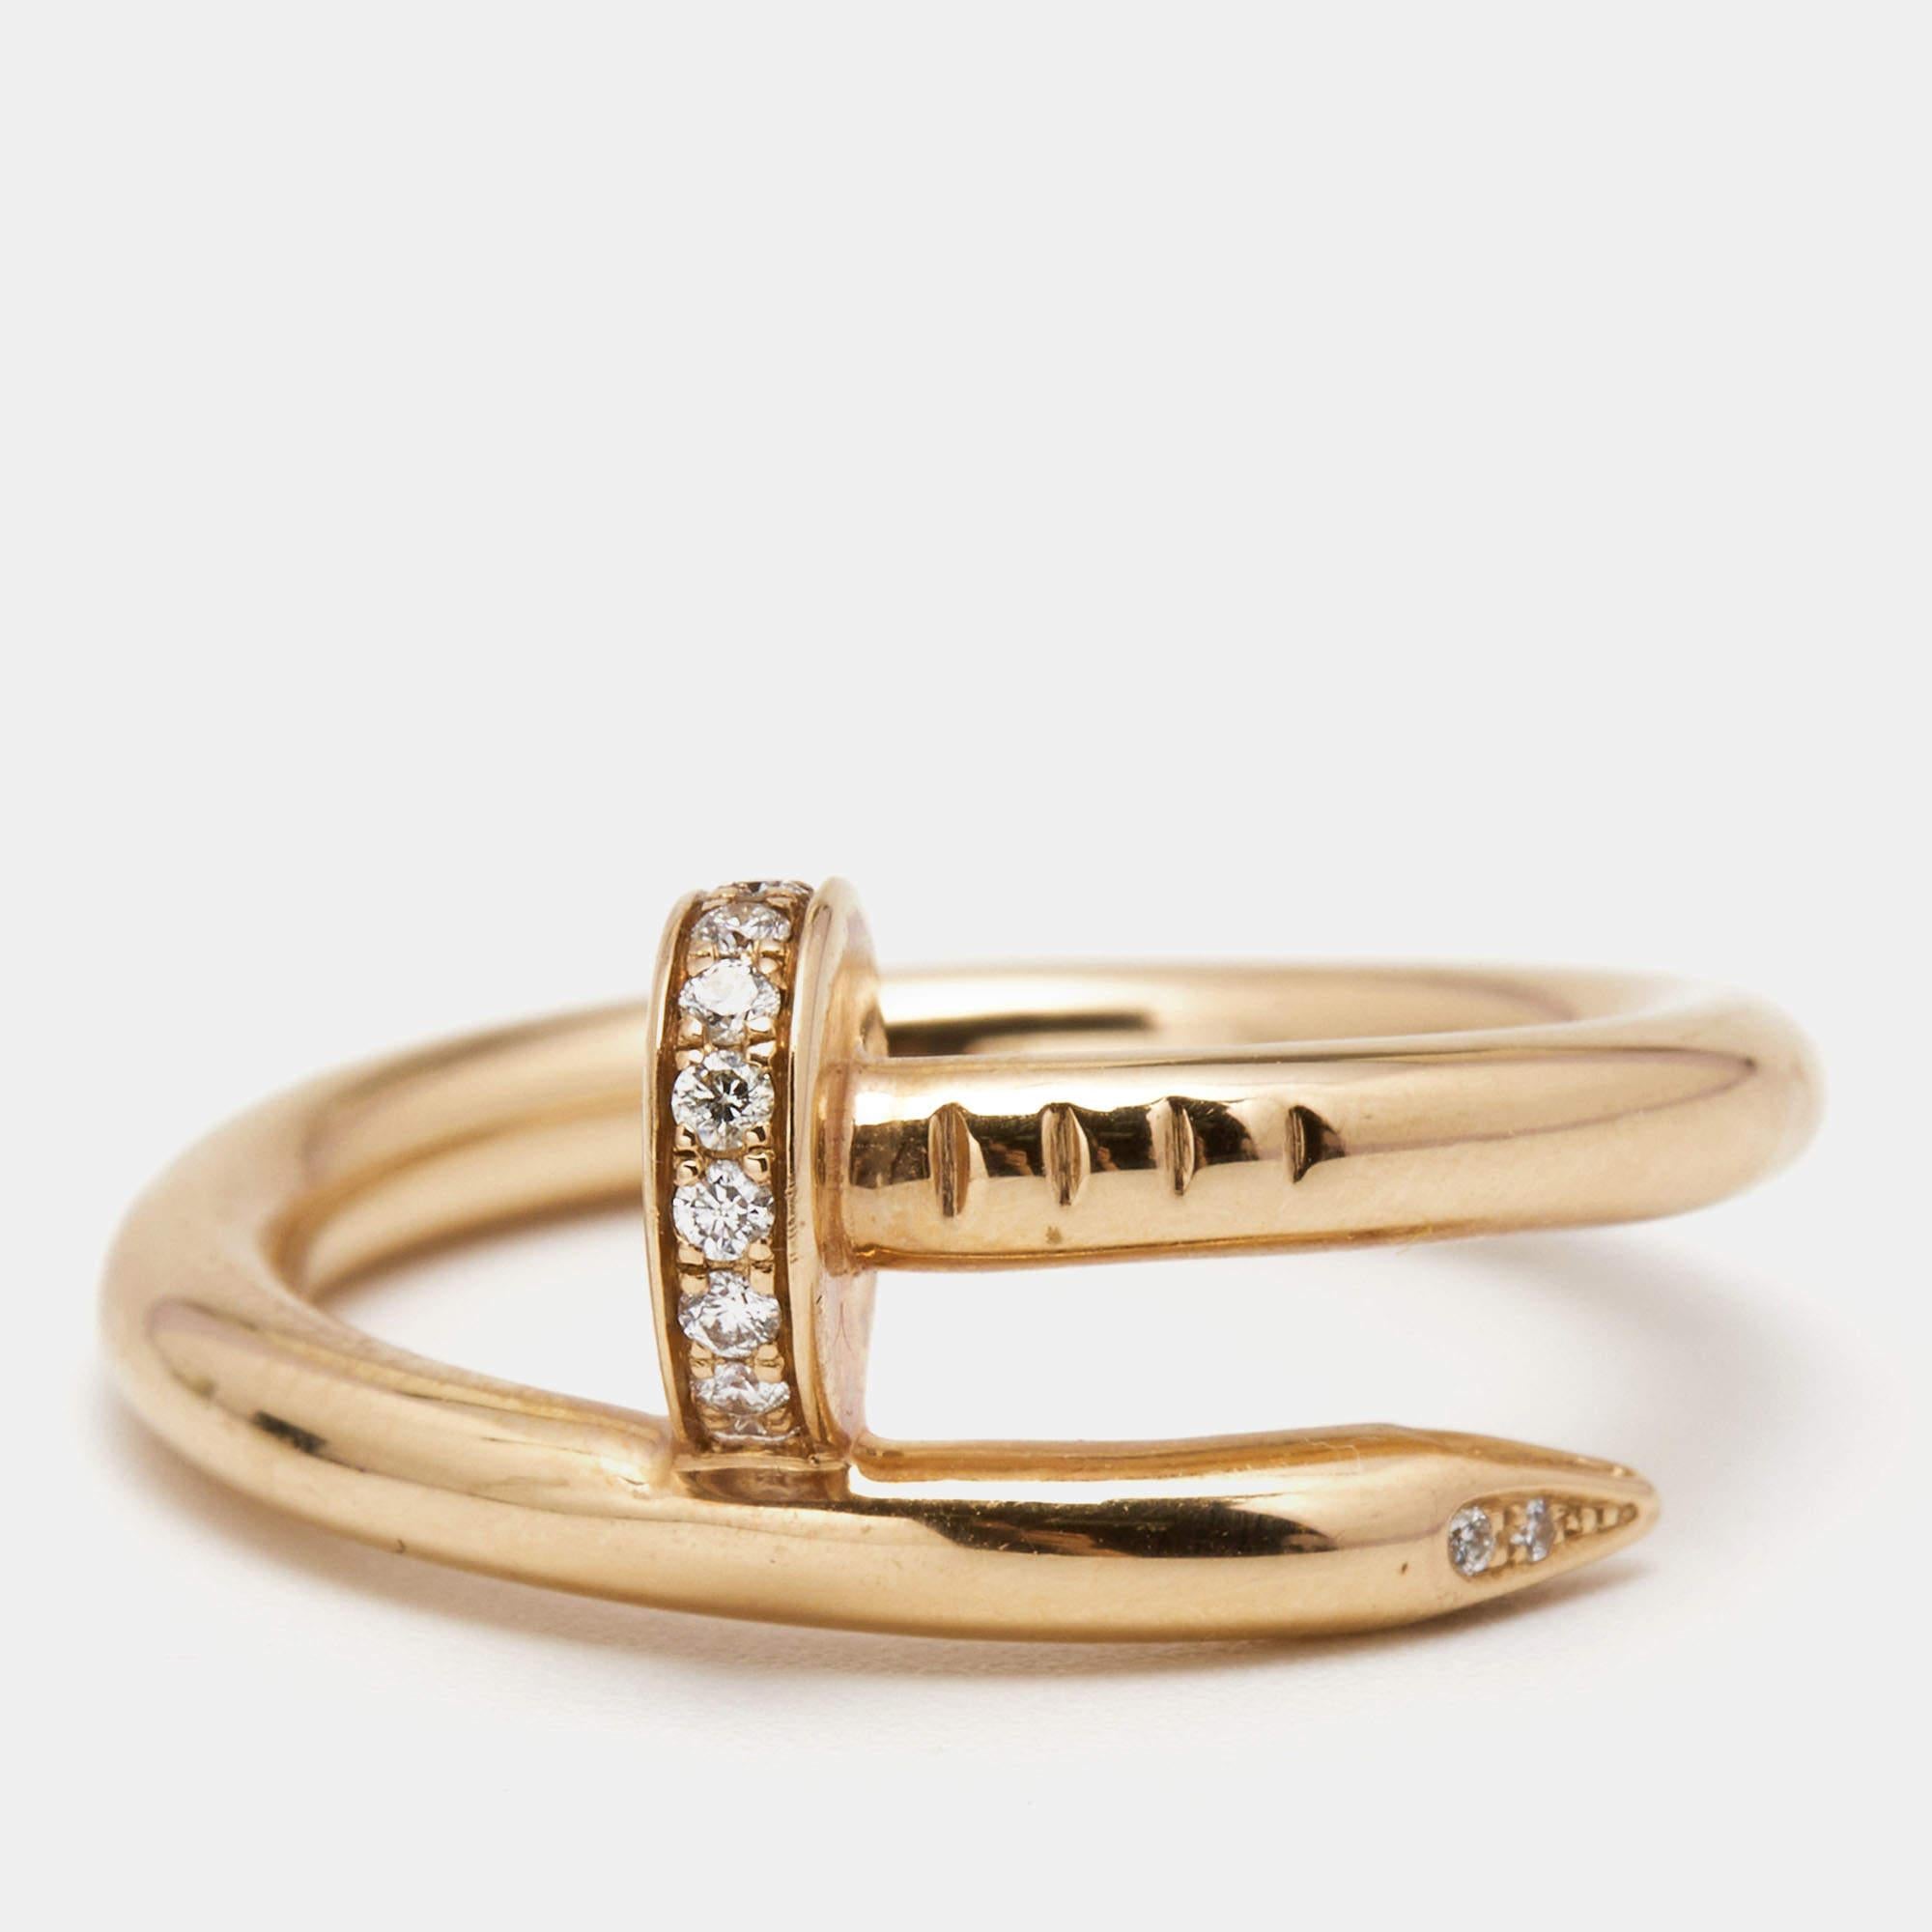 The Cartier Juste Un Clou ring is a luxurious and captivating piece of jewelry. Crafted in exquisite 18k rose gold, it features a striking nail-inspired design adorned with brilliant-cut diamonds. This elegant ring combines modern edginess with